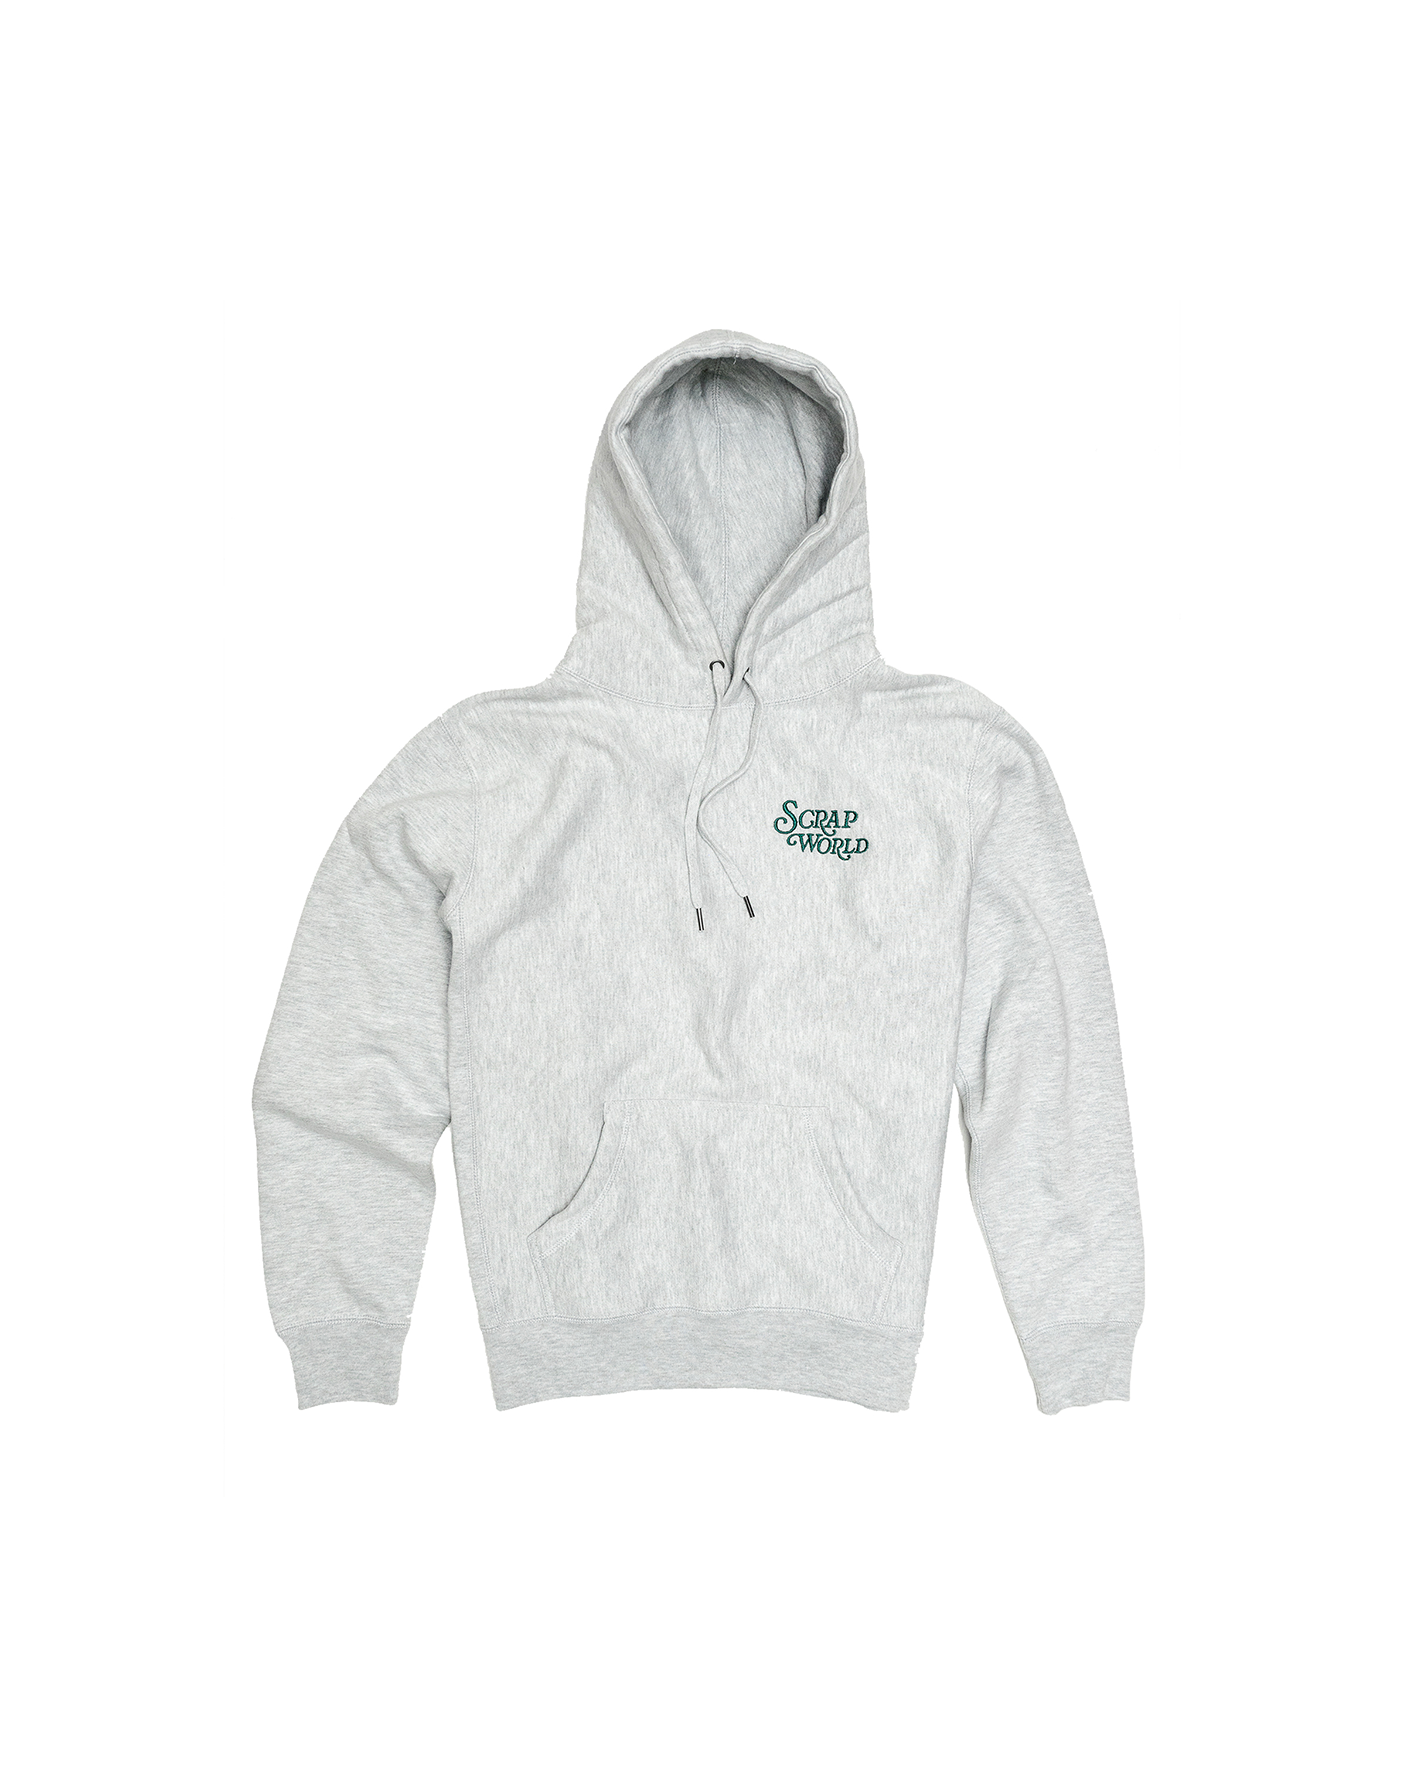 CLASSIC LOGO EMBROIDERED HOODIE